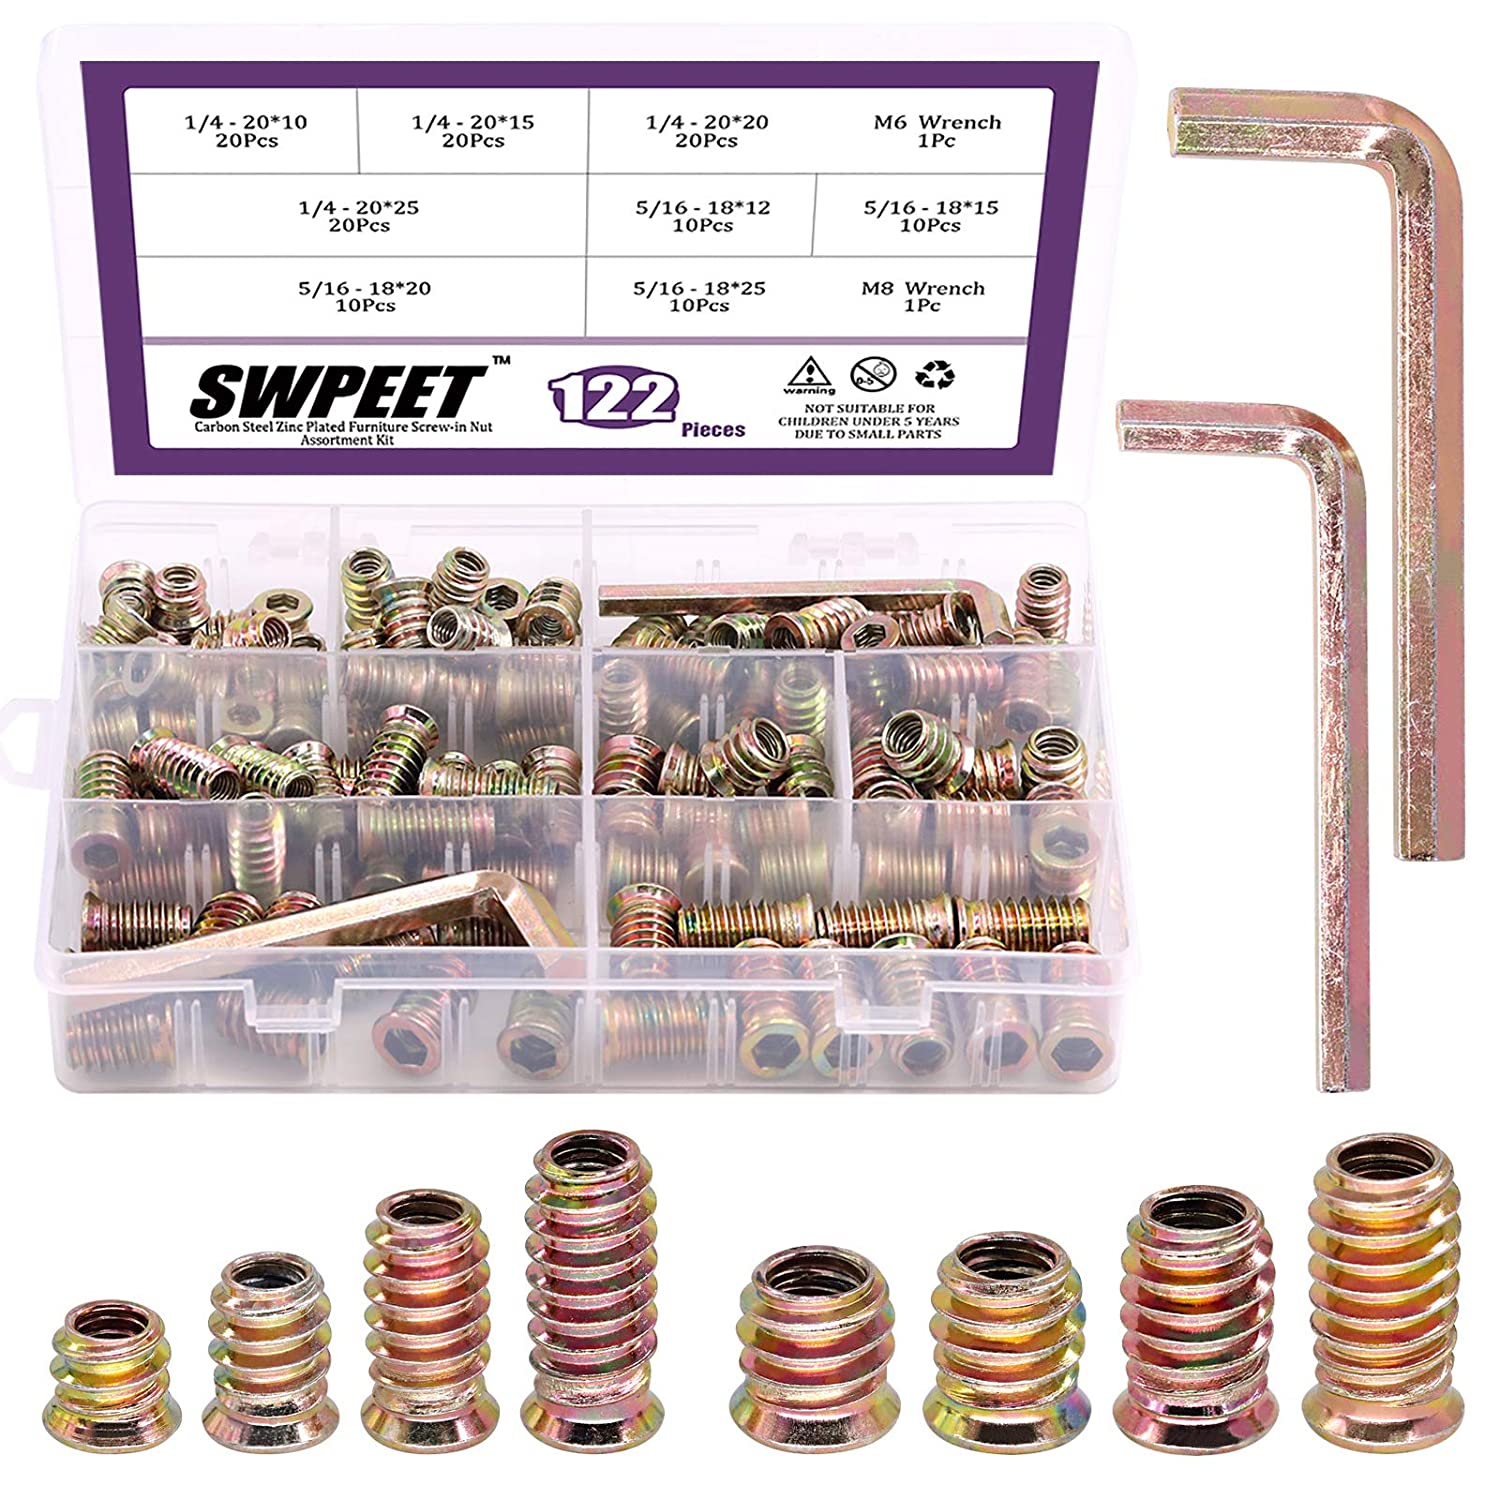 Swpeet Carbon Steel Assorted Sizes Threaded Inserts, 122-Count